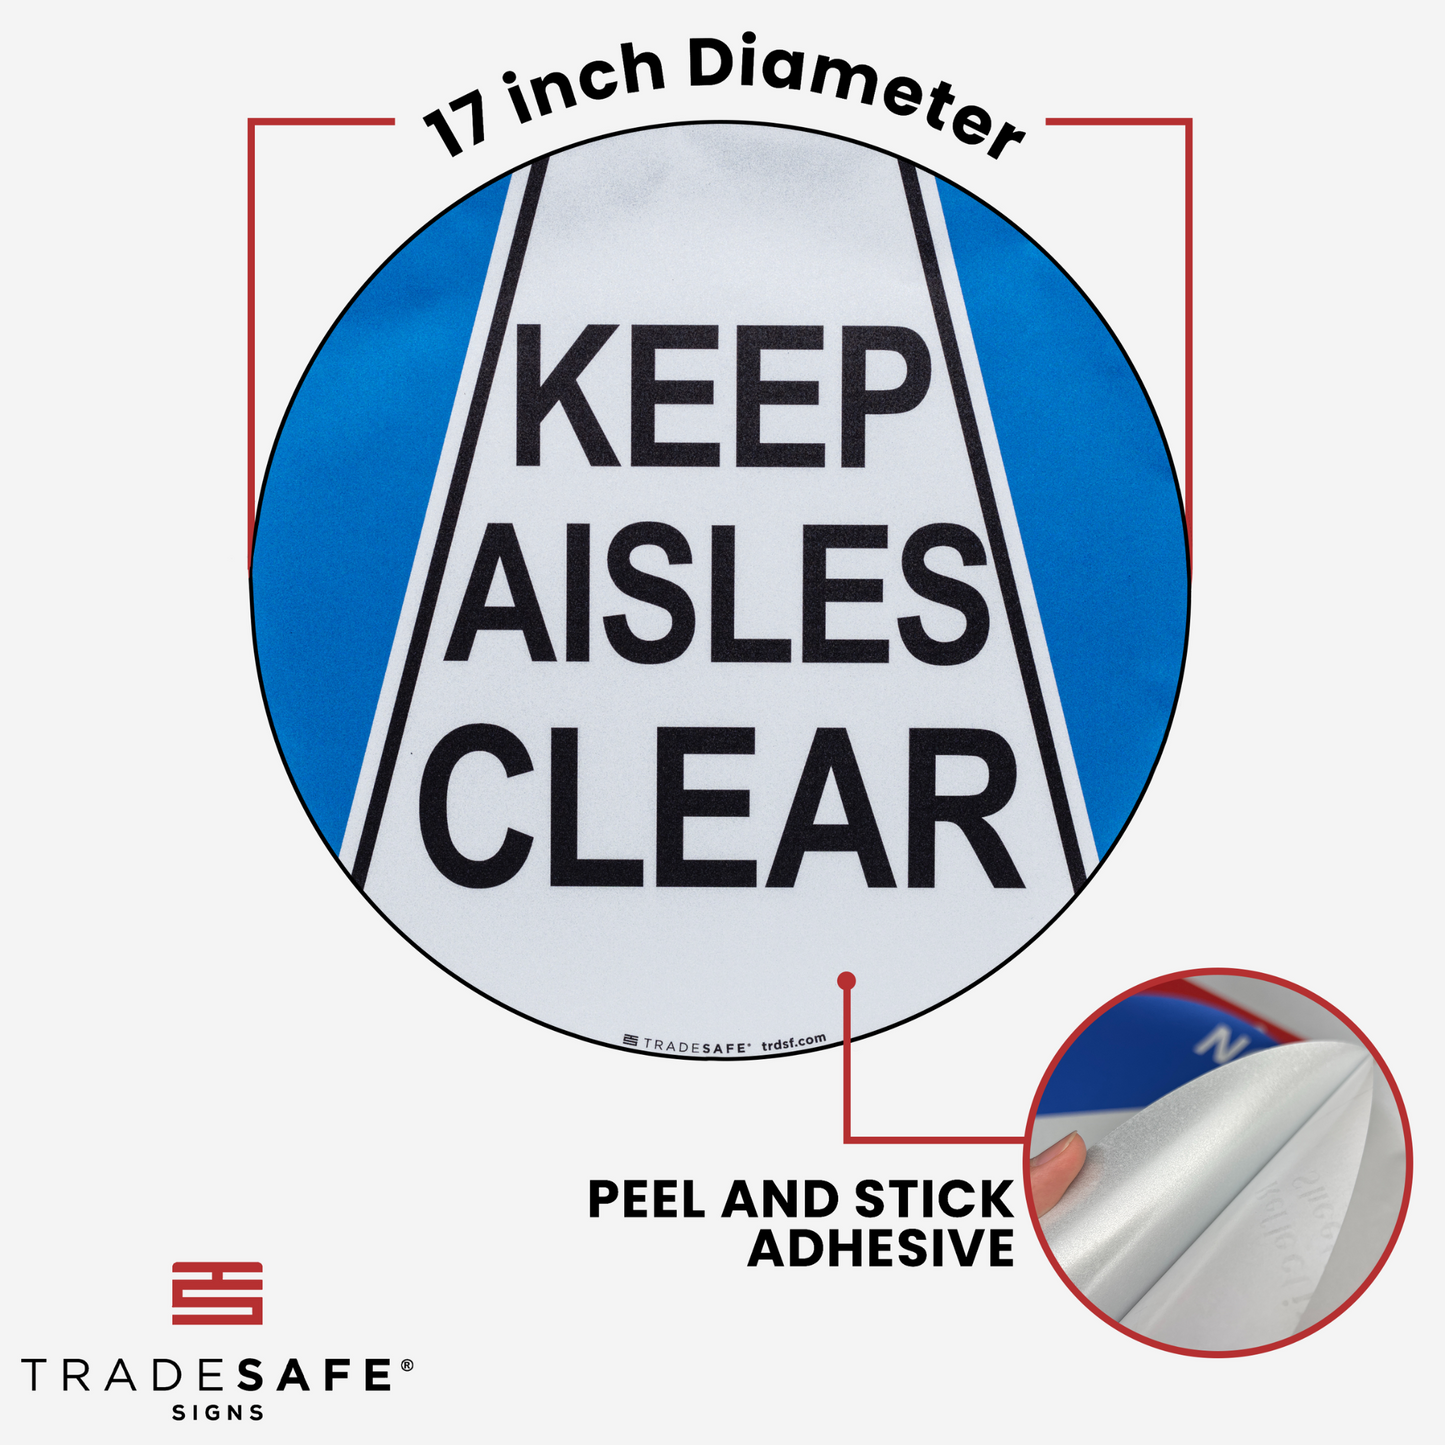 dimensions of keep aisles clear sign